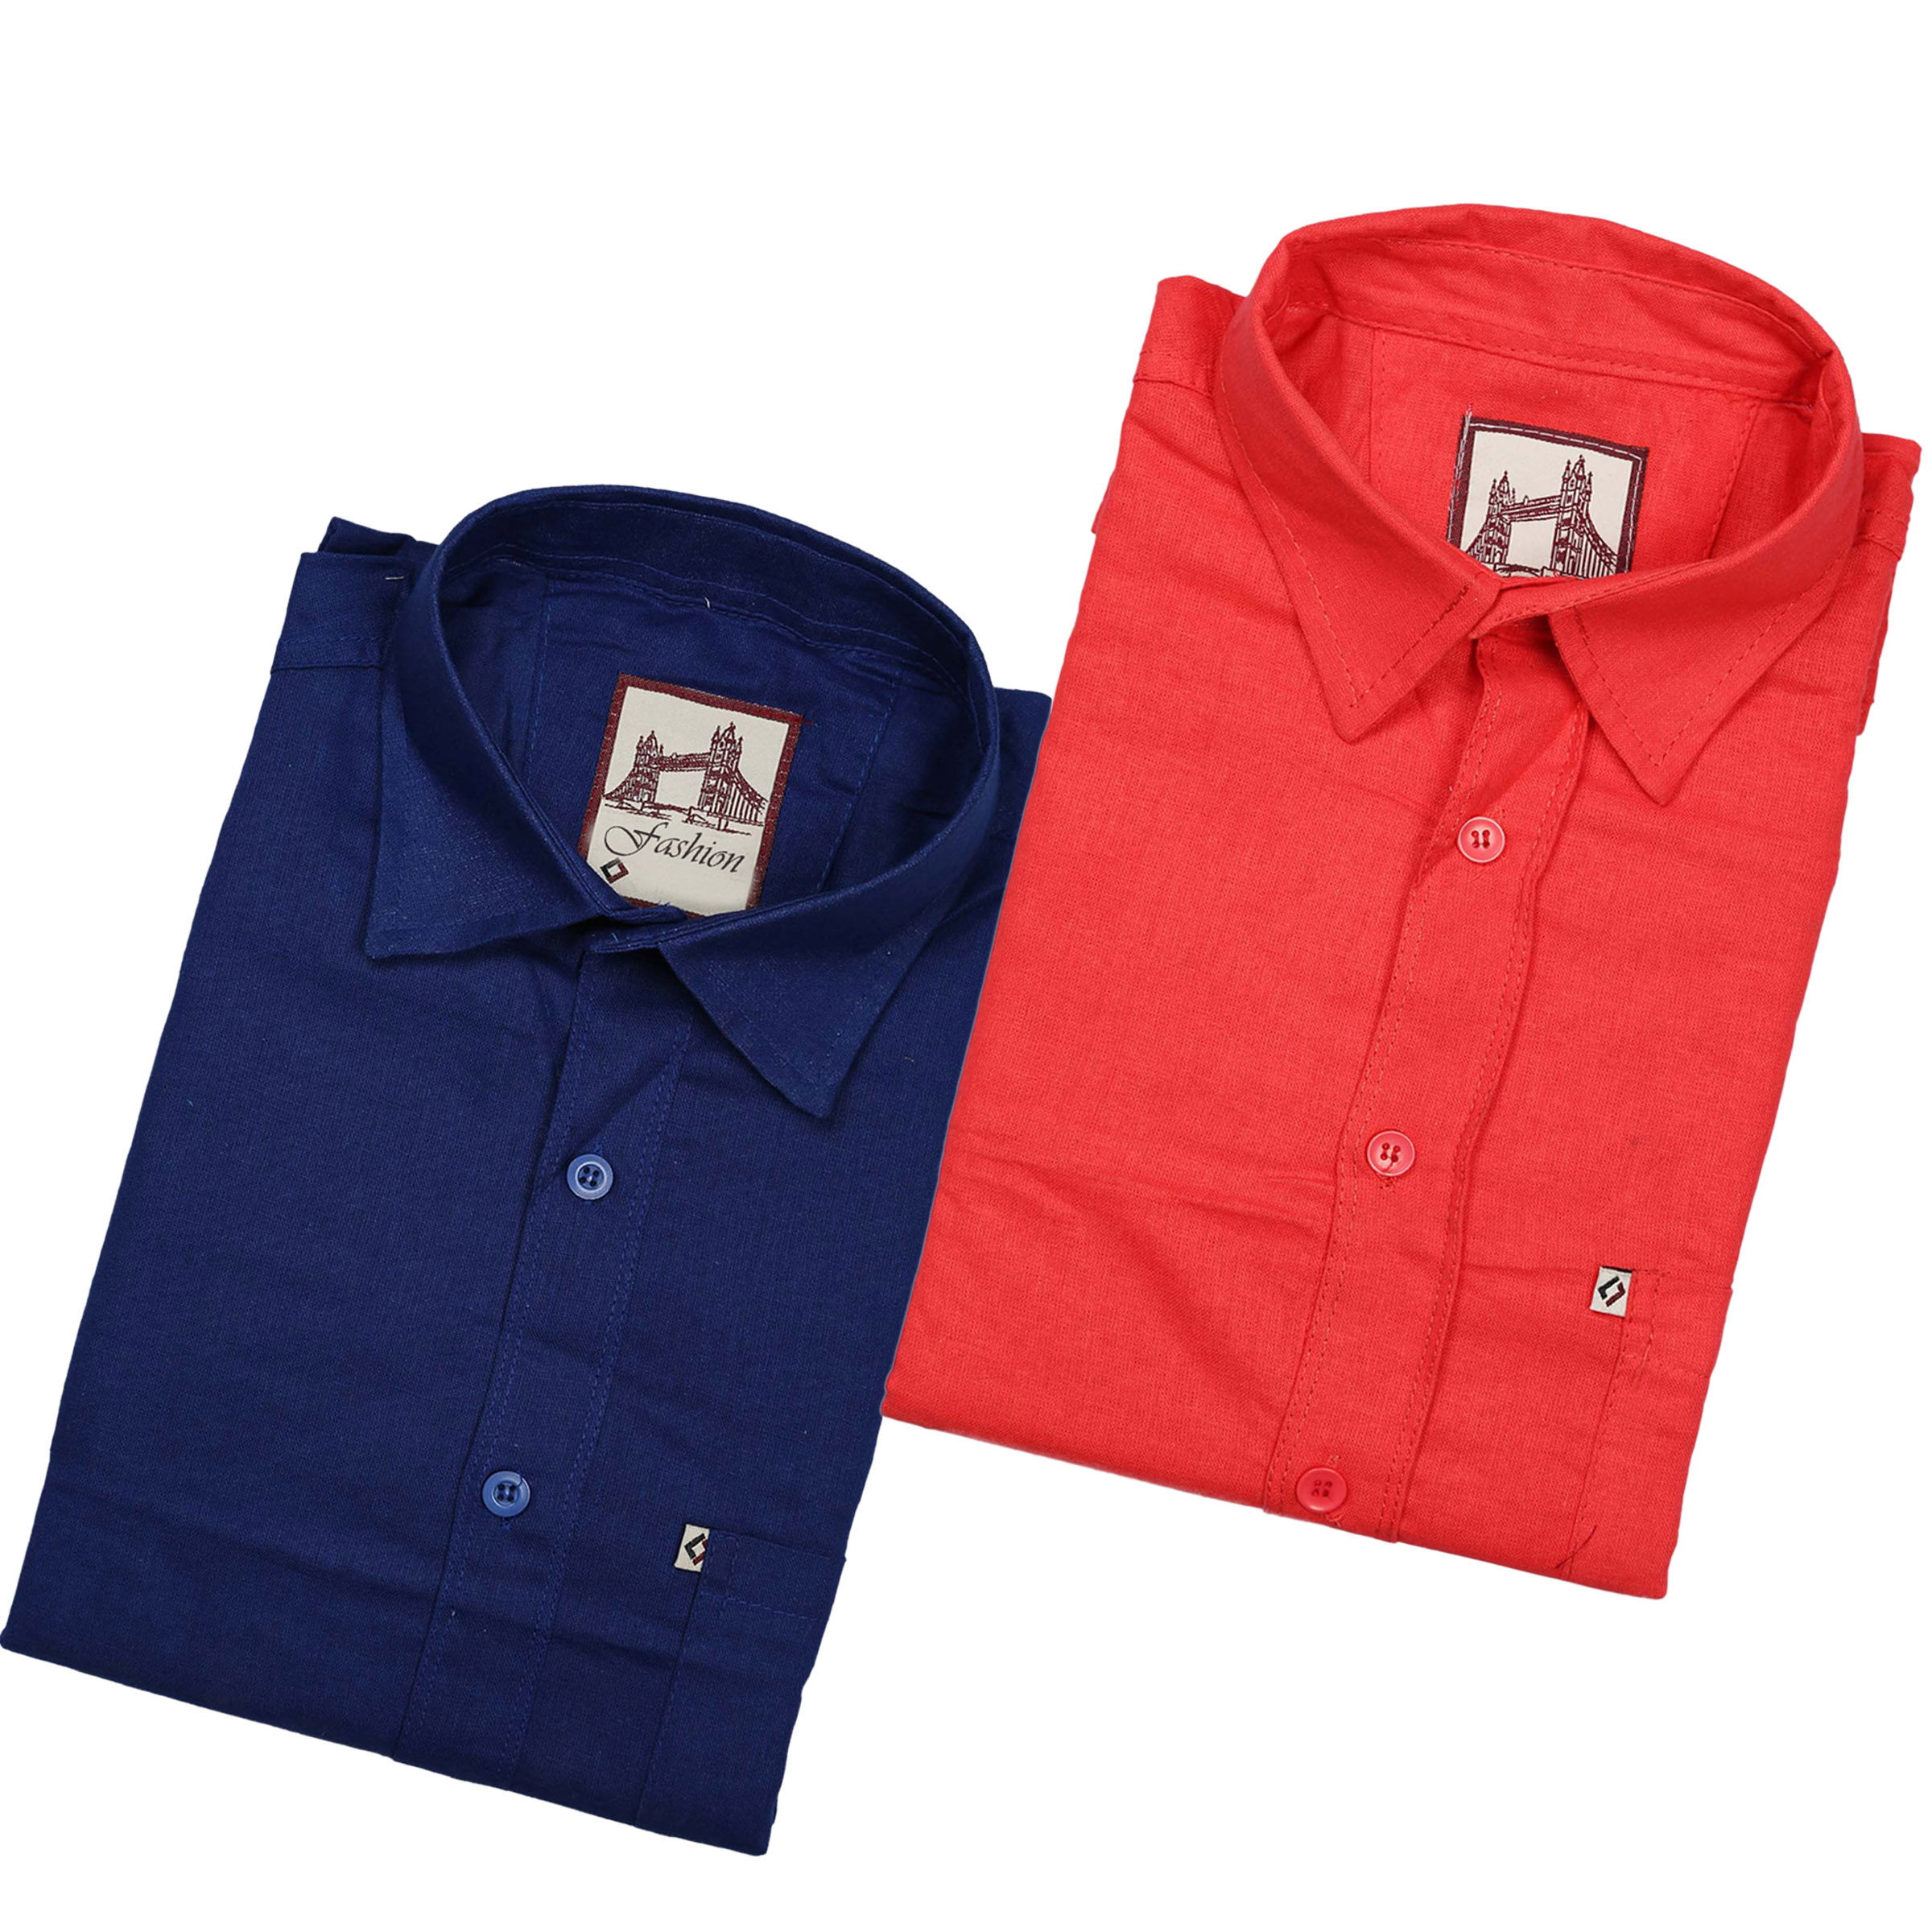 Buy Spain Style Solid Regular Fit Casual Shirts For Men's Pack of 2 ...